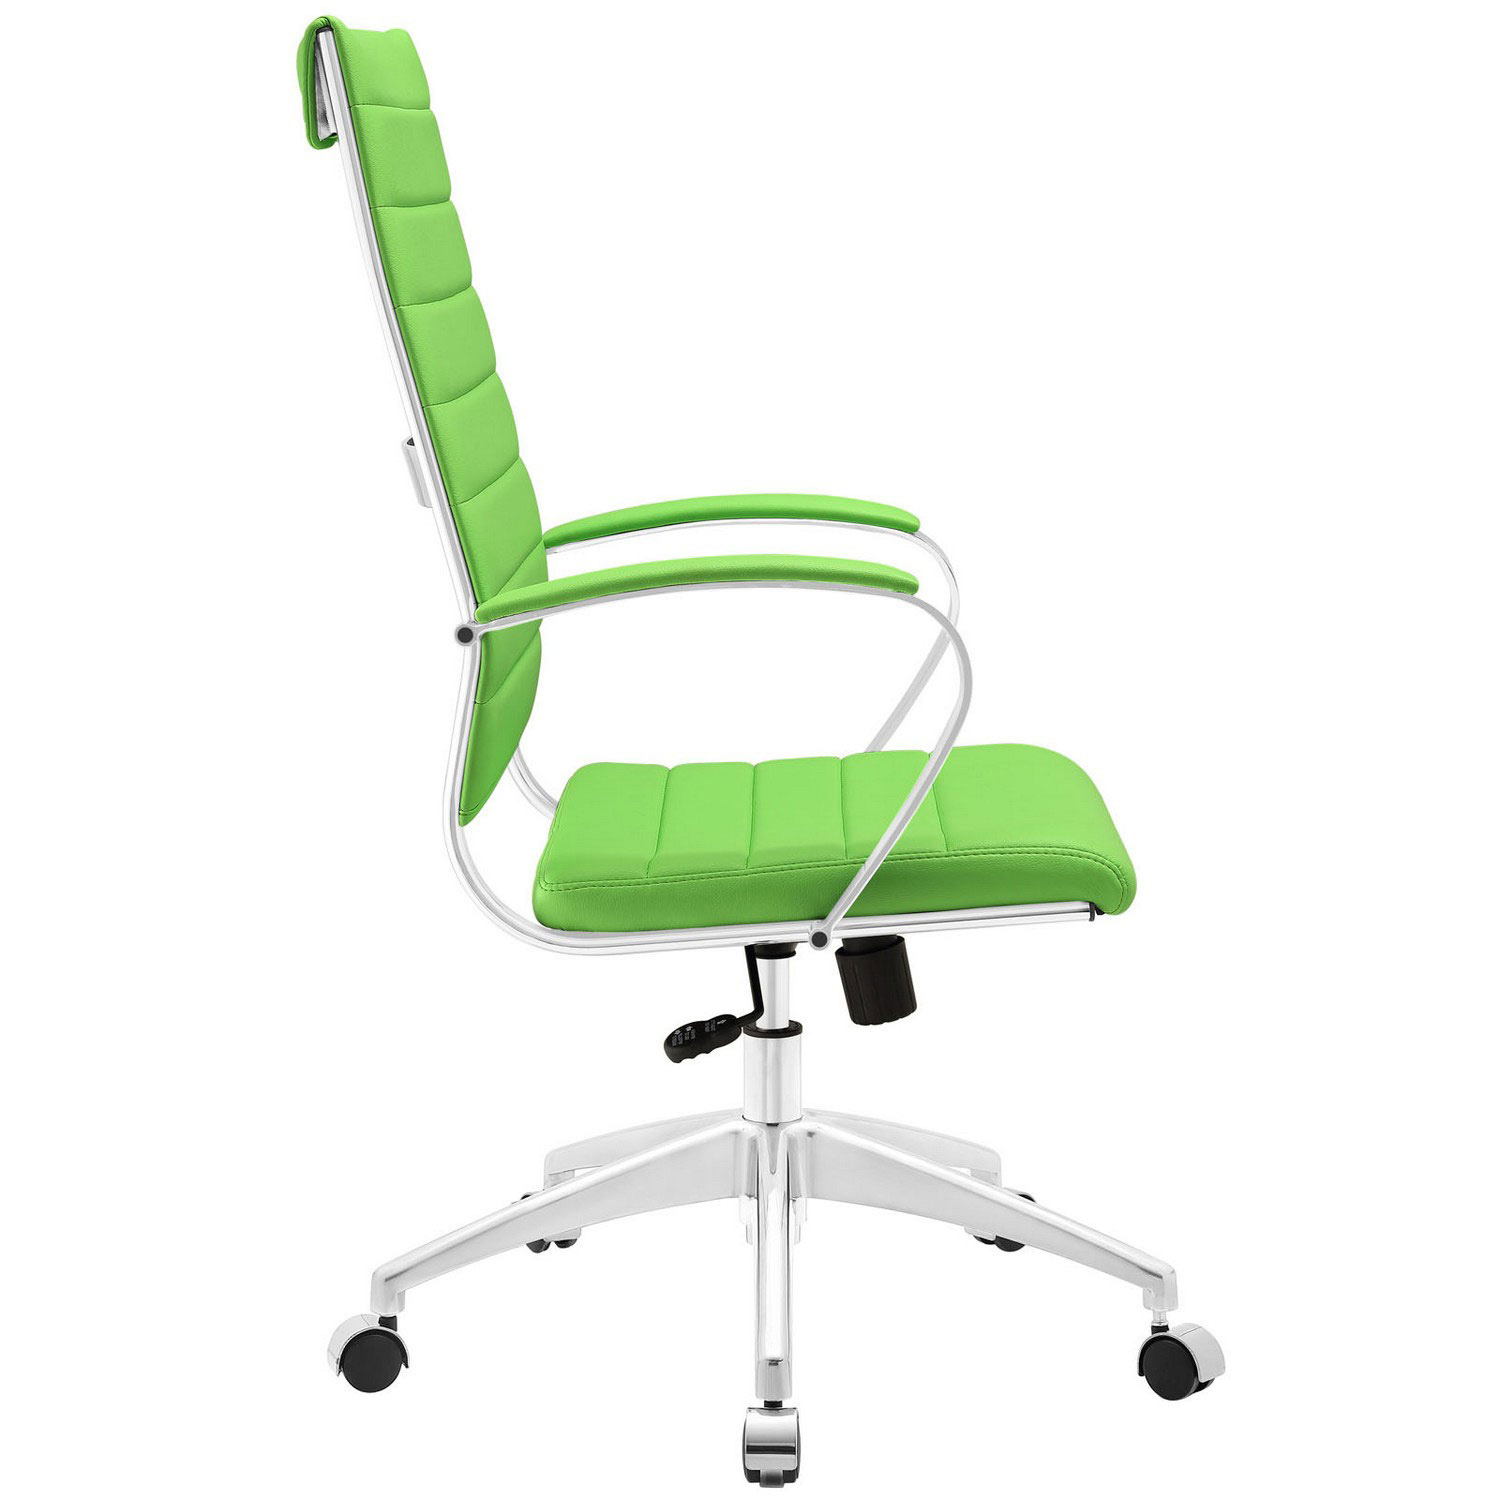 Modway Jive Highback Office Chair - Bright Green